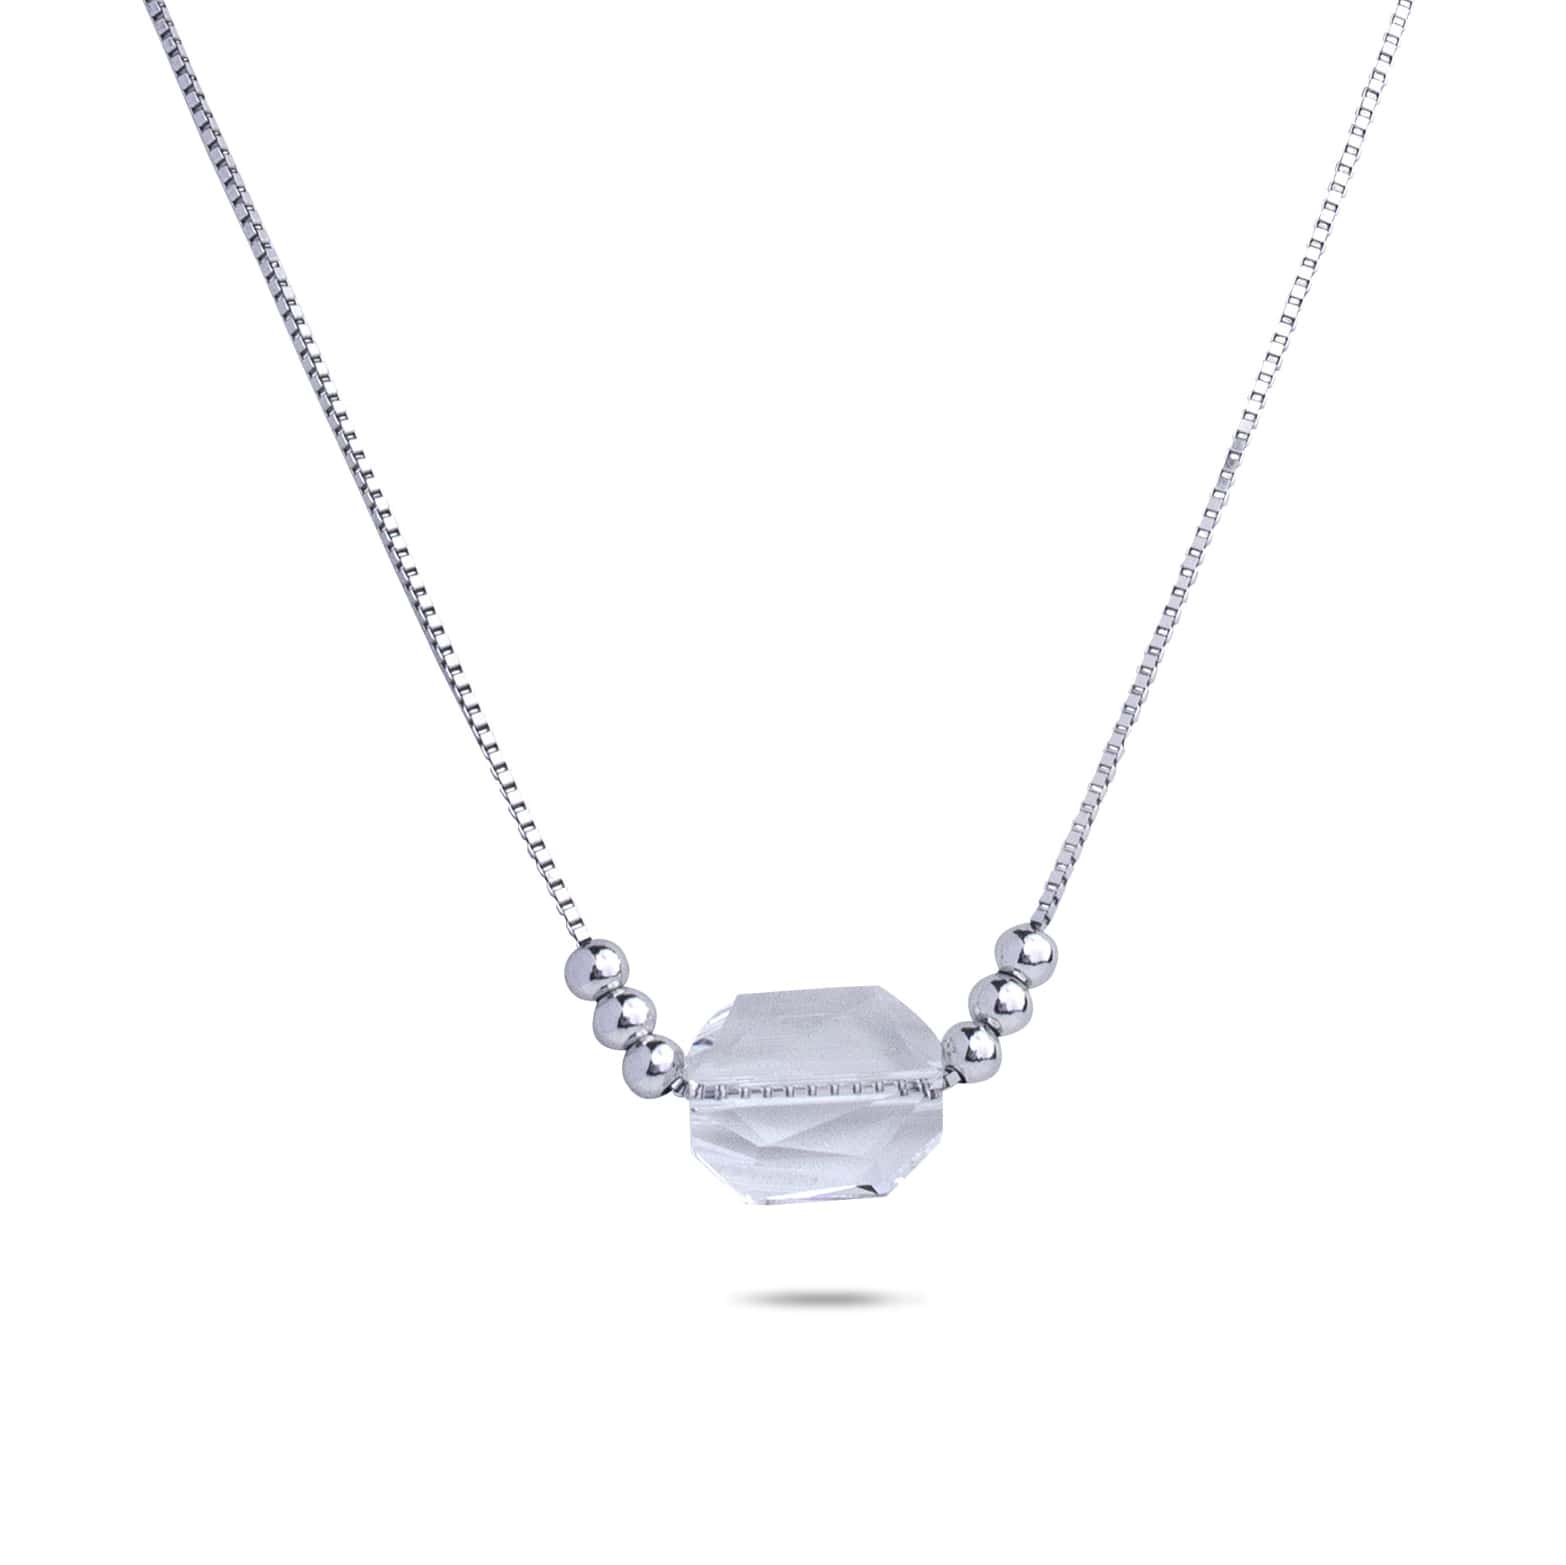 RRJ0847 Pure 925 Sterling Silver Necklace